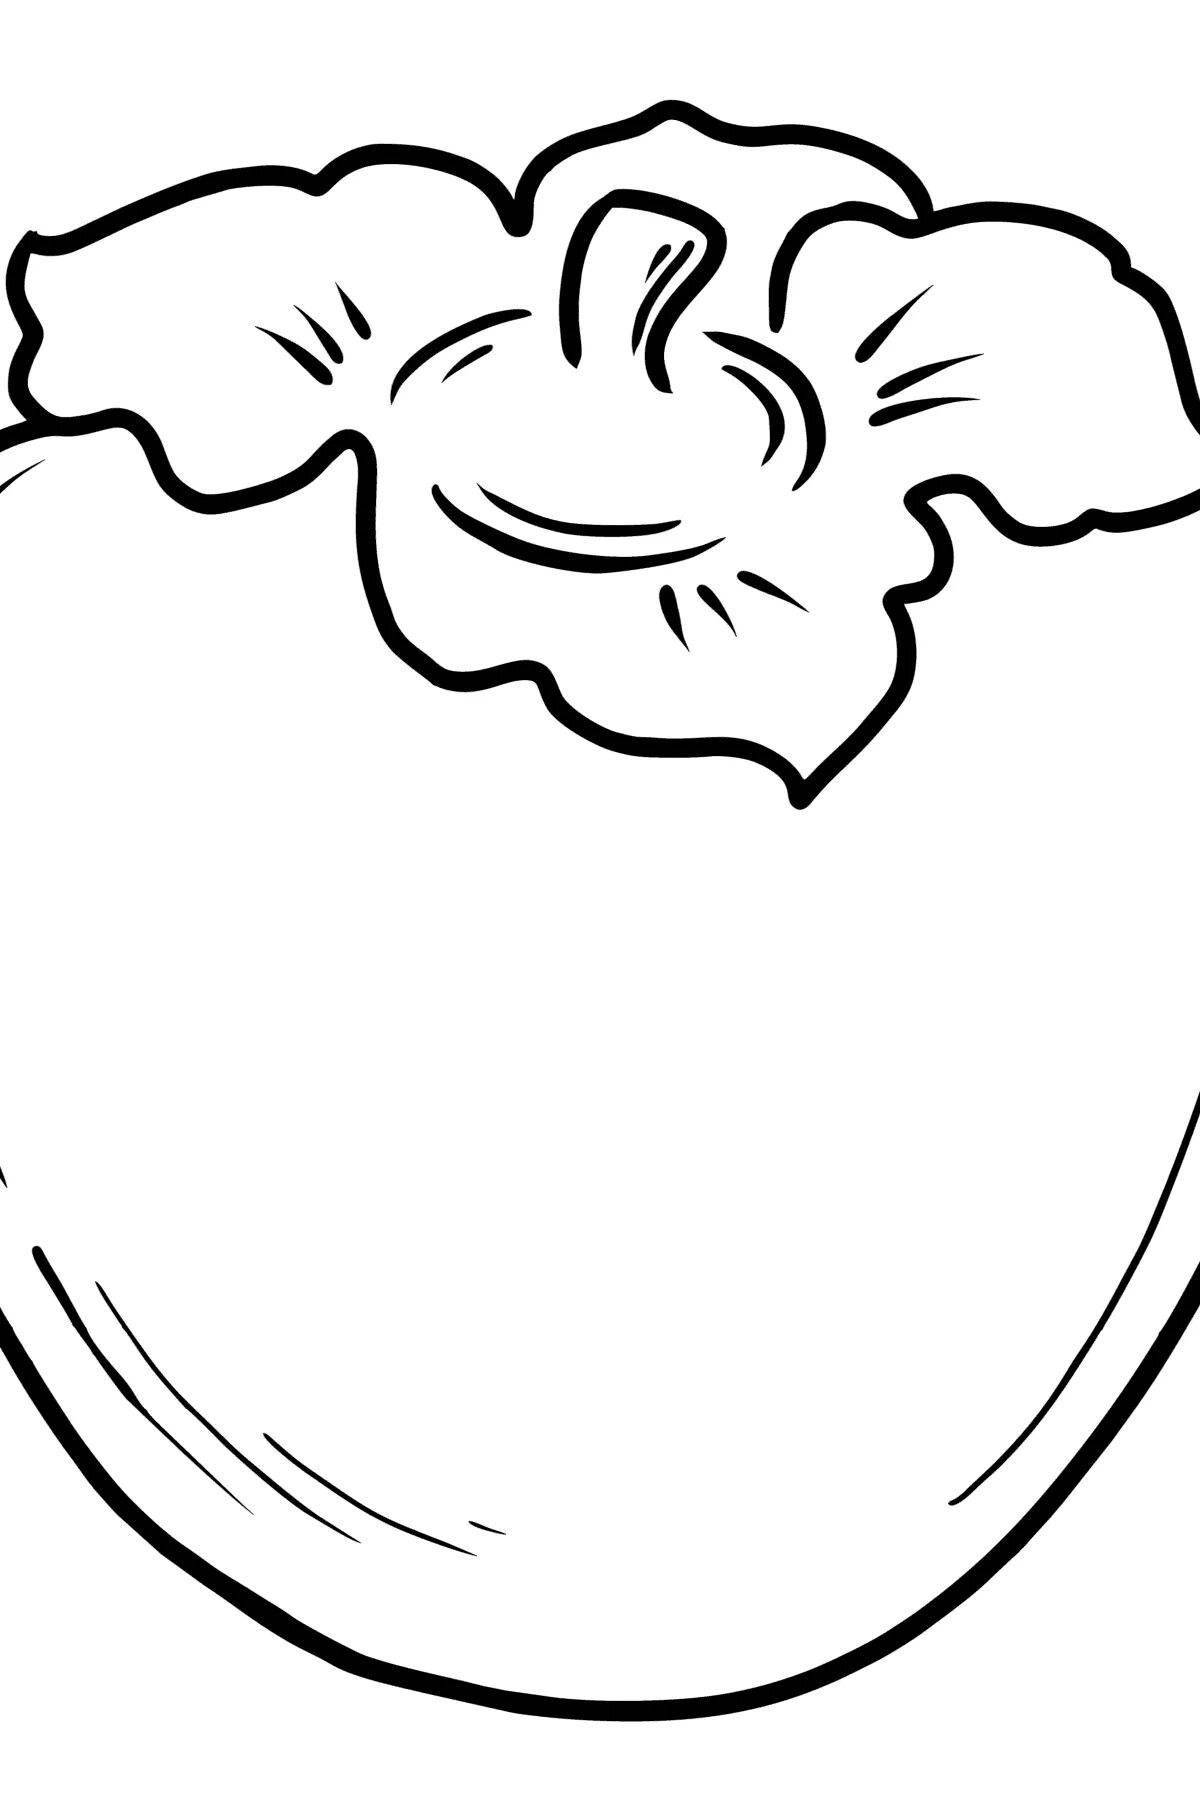 Blissful persimmon coloring page